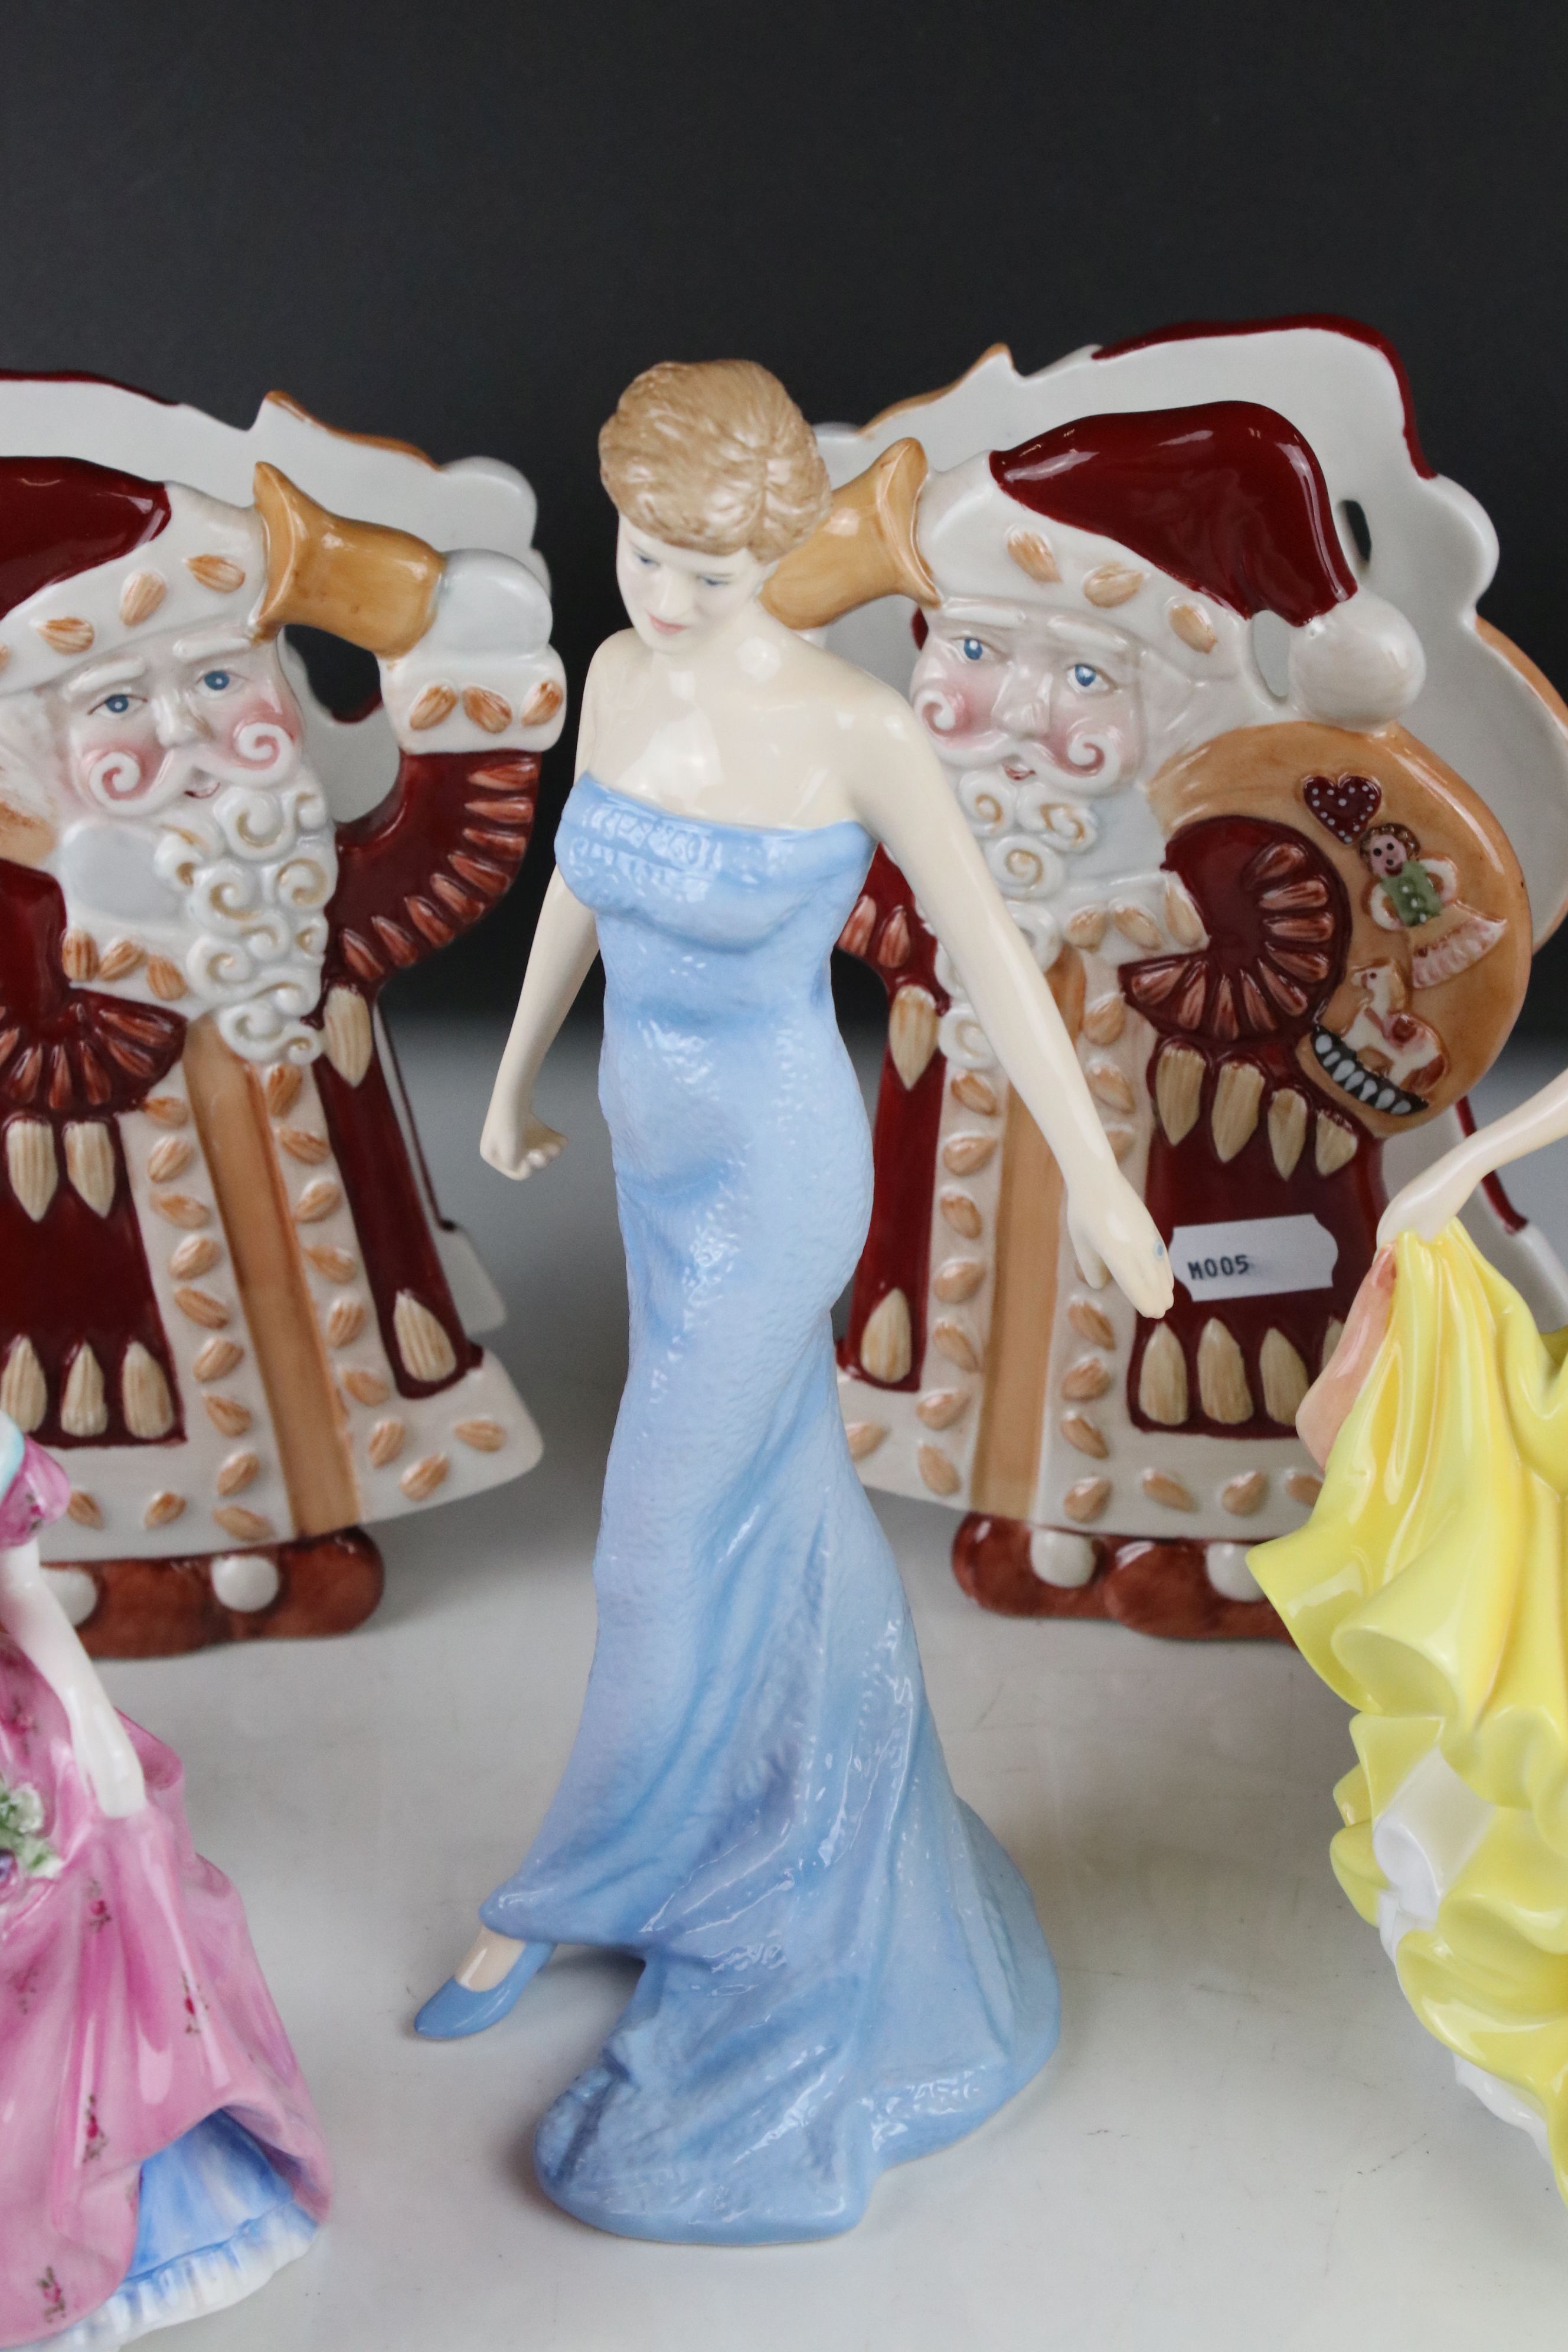 Mixed Lot of Ceramics including Two Royal Doulton Figurines and a Coalport Figurine, Pair of - Image 9 of 10